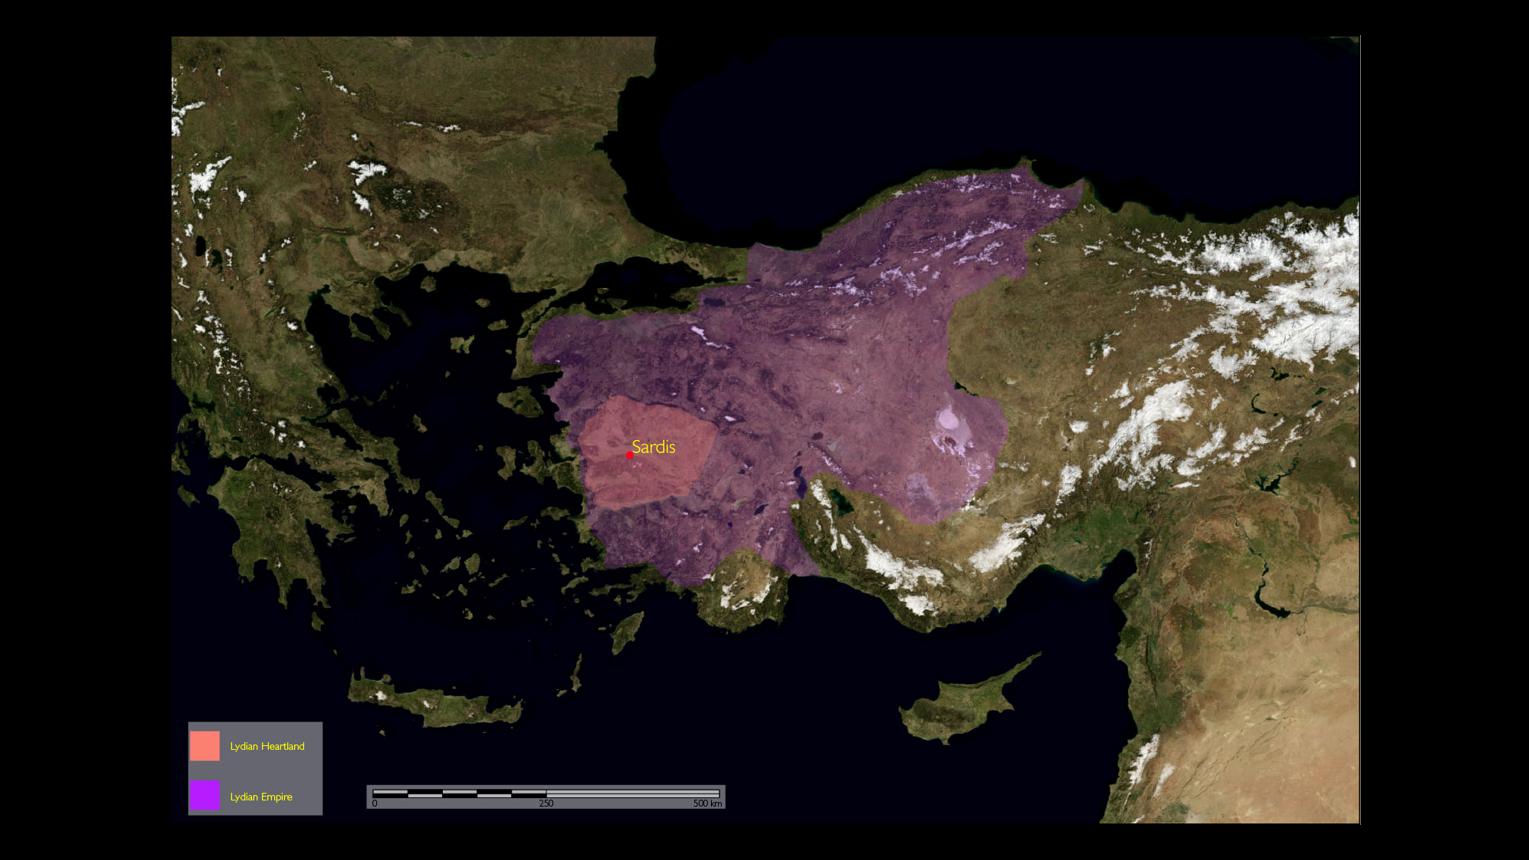 Image of second power point slide. Slide contains photo of topographical map. On the map there is a purple area referenced as the Lydian Empire, inside the purple area there is a smaller pink area labeled Lydian Heartland. In the very center of these two areas is a red dot denoting the site of Sardis.